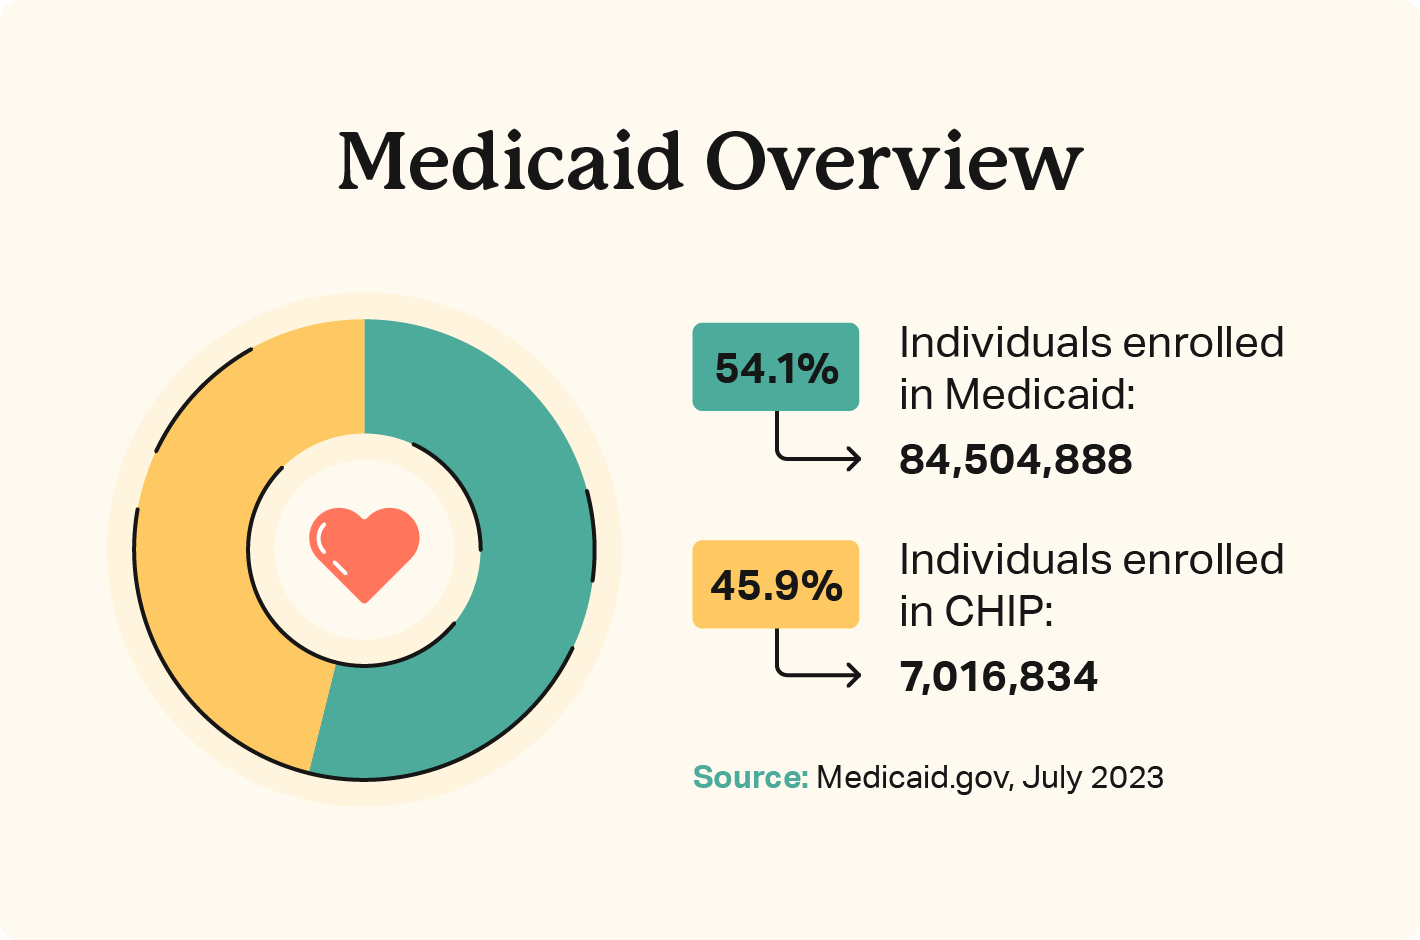 A doughnut chart compares the 54.1% of individuals that are enrolled in Medicaid vs 45.9% enrolled in CHIP Medicaid.